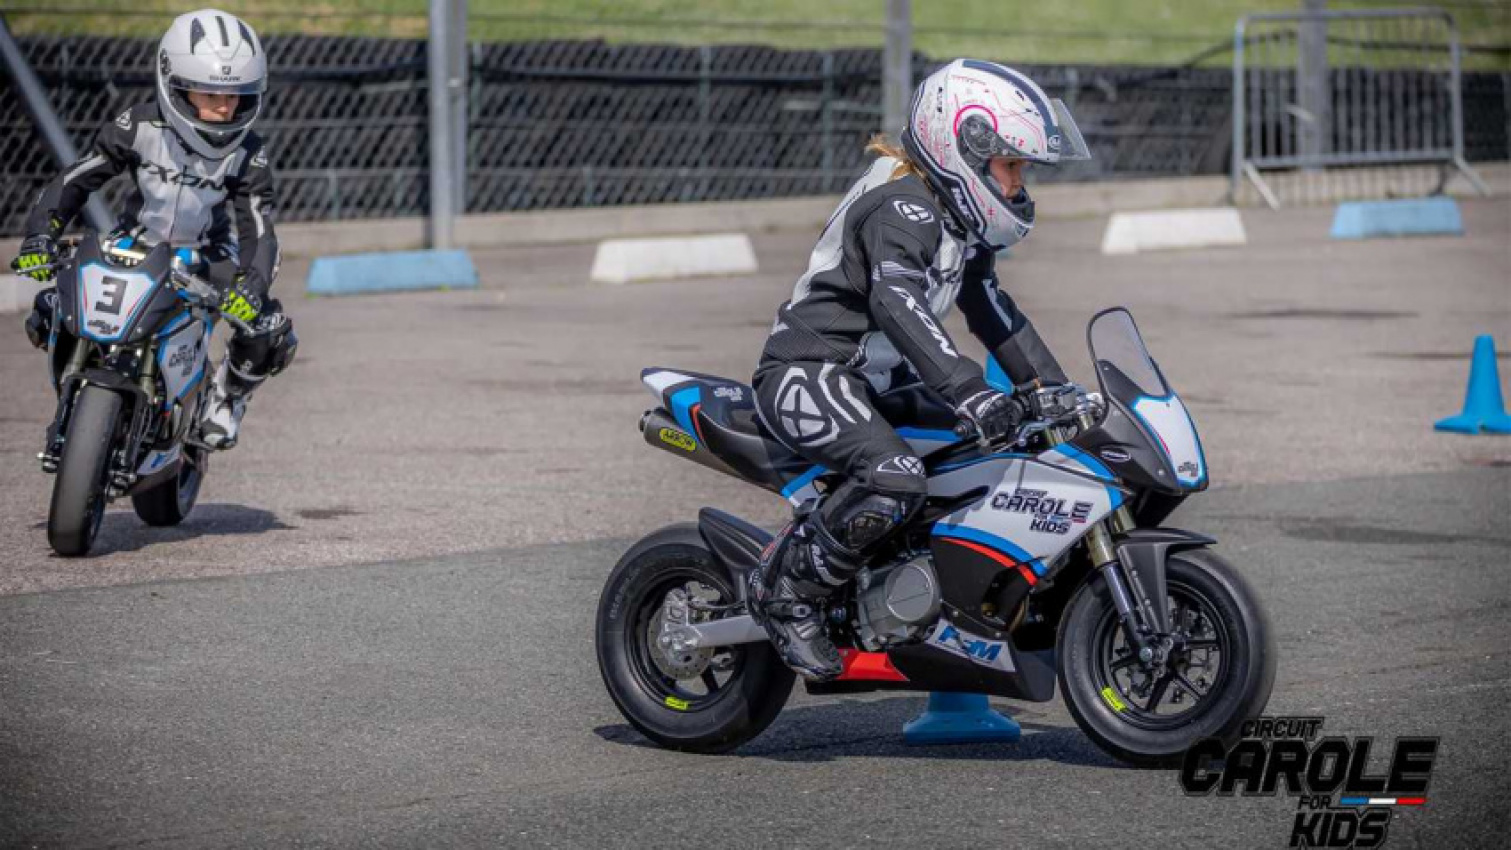 autos, cars, ram, france’s circuit carole opens track to children with new program